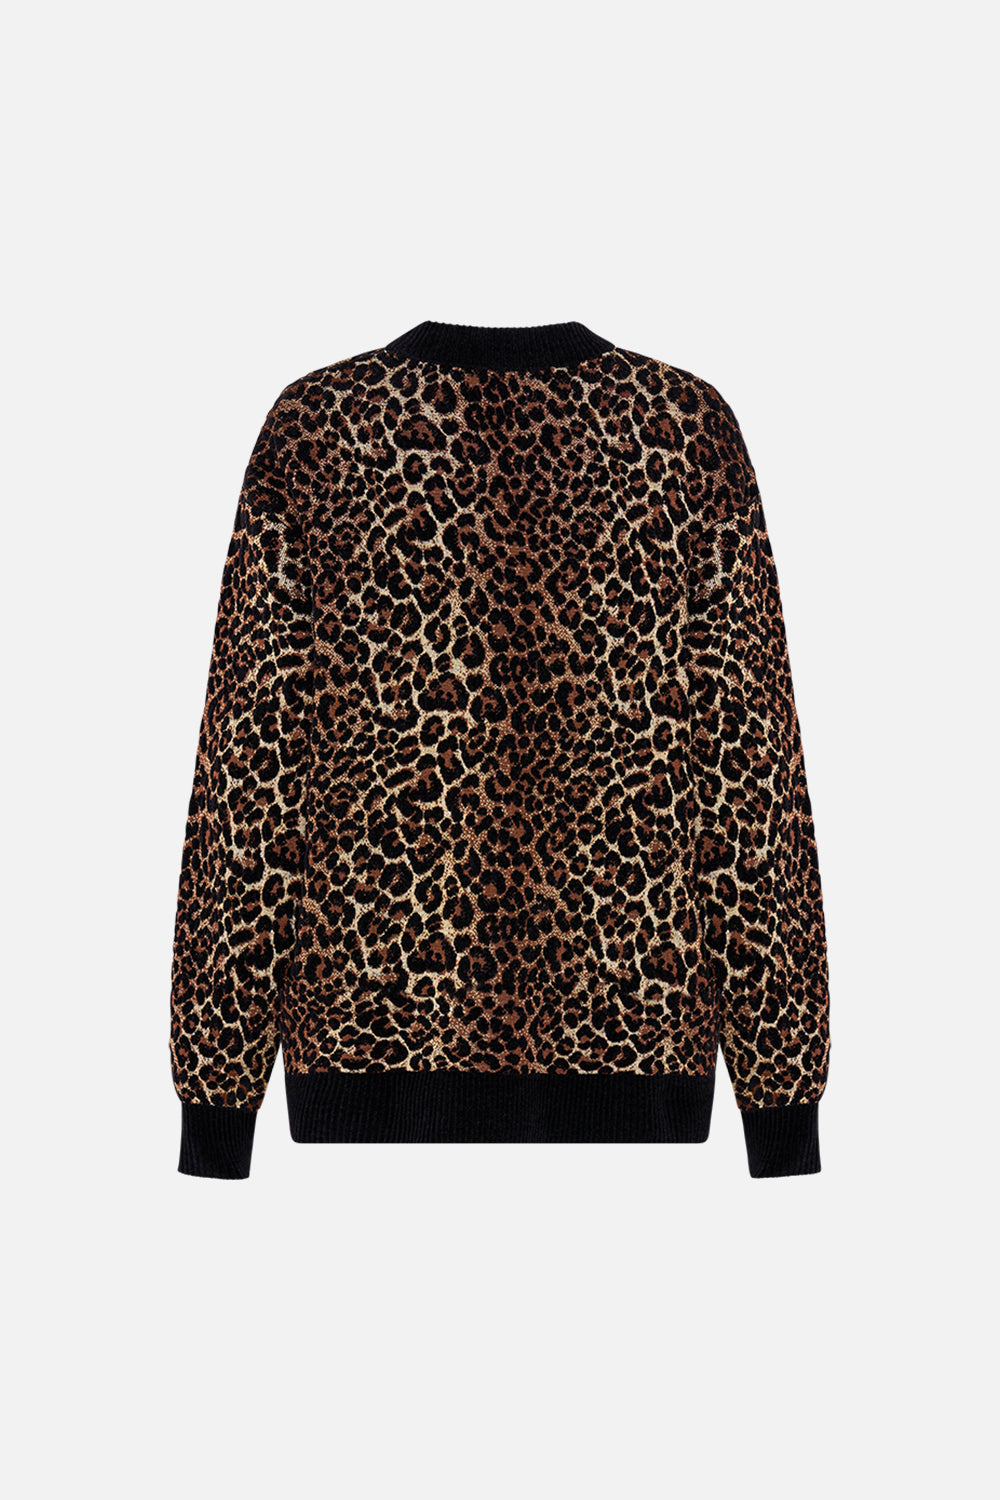 CAMILLA Leopard Crew Neck Oversized Knit in Amsterglam